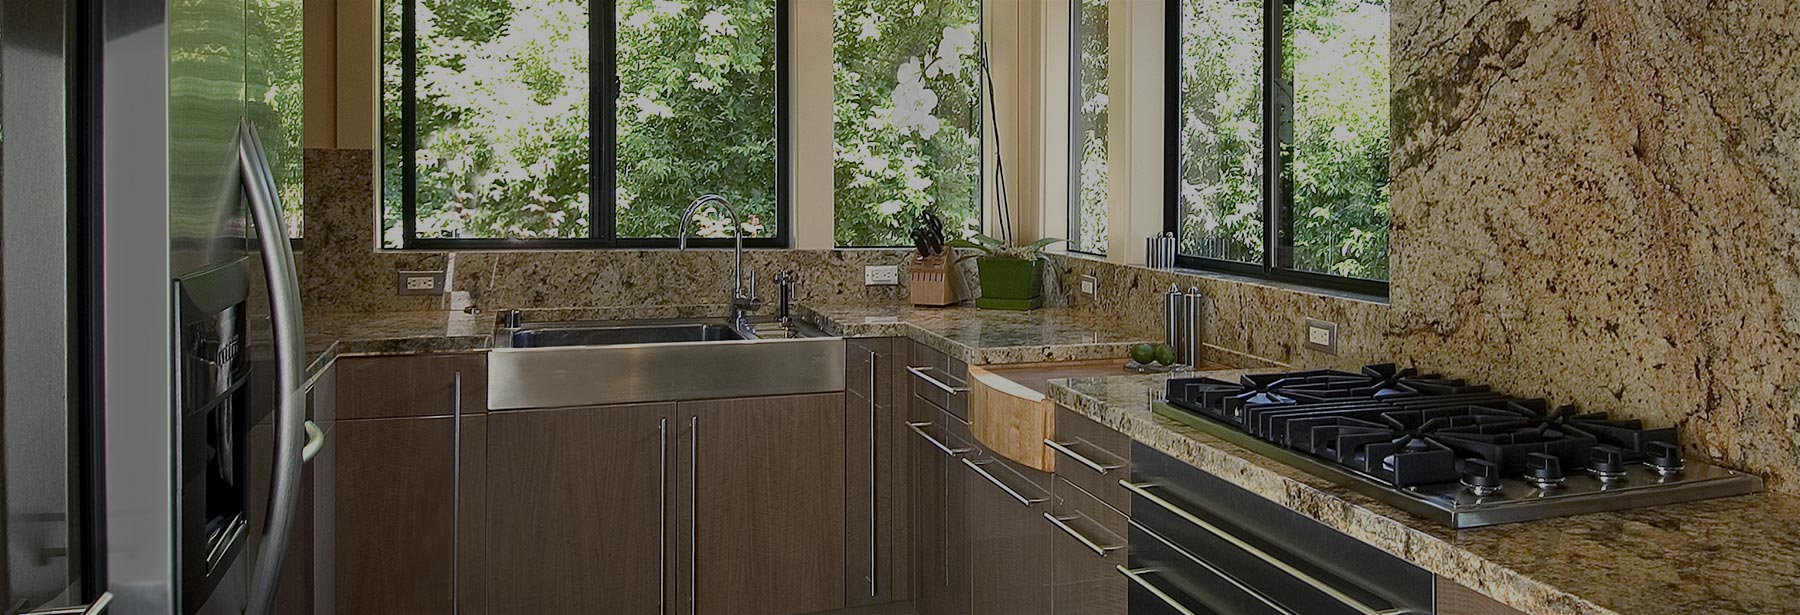 Natural Stone Services Pitell Granite In Pittsburgh Pa